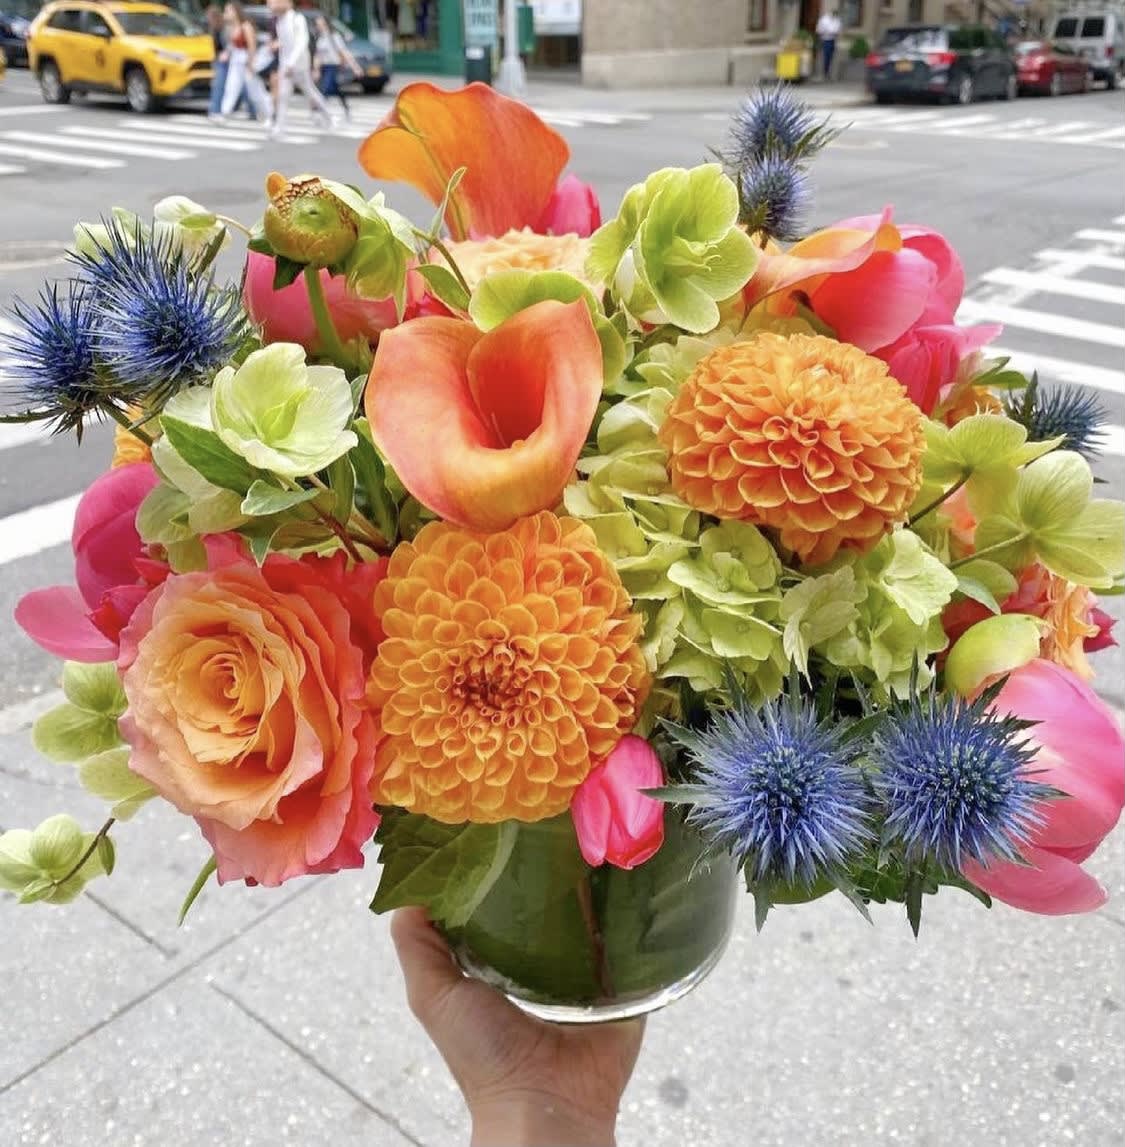 Summertime Brights - A mixed arrangement with bright and colorful flowers. Flowers subject to availability.